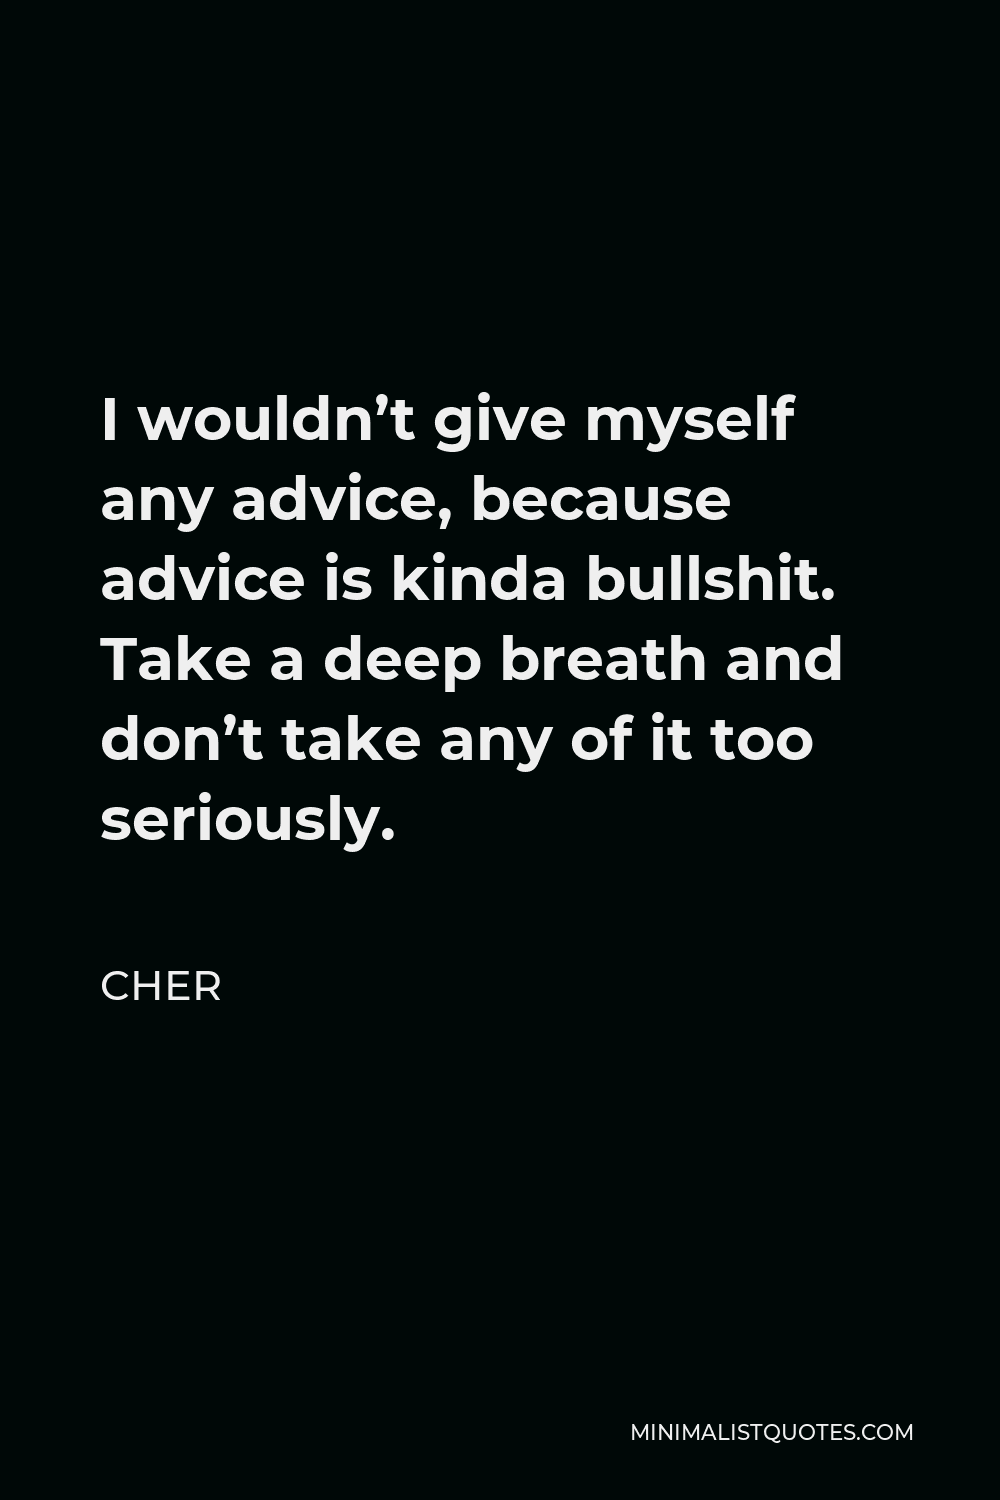 Cher Quote - I wouldn’t give myself any advice, because advice is kinda bullshit. Take a deep breath and don’t take any of it too seriously.